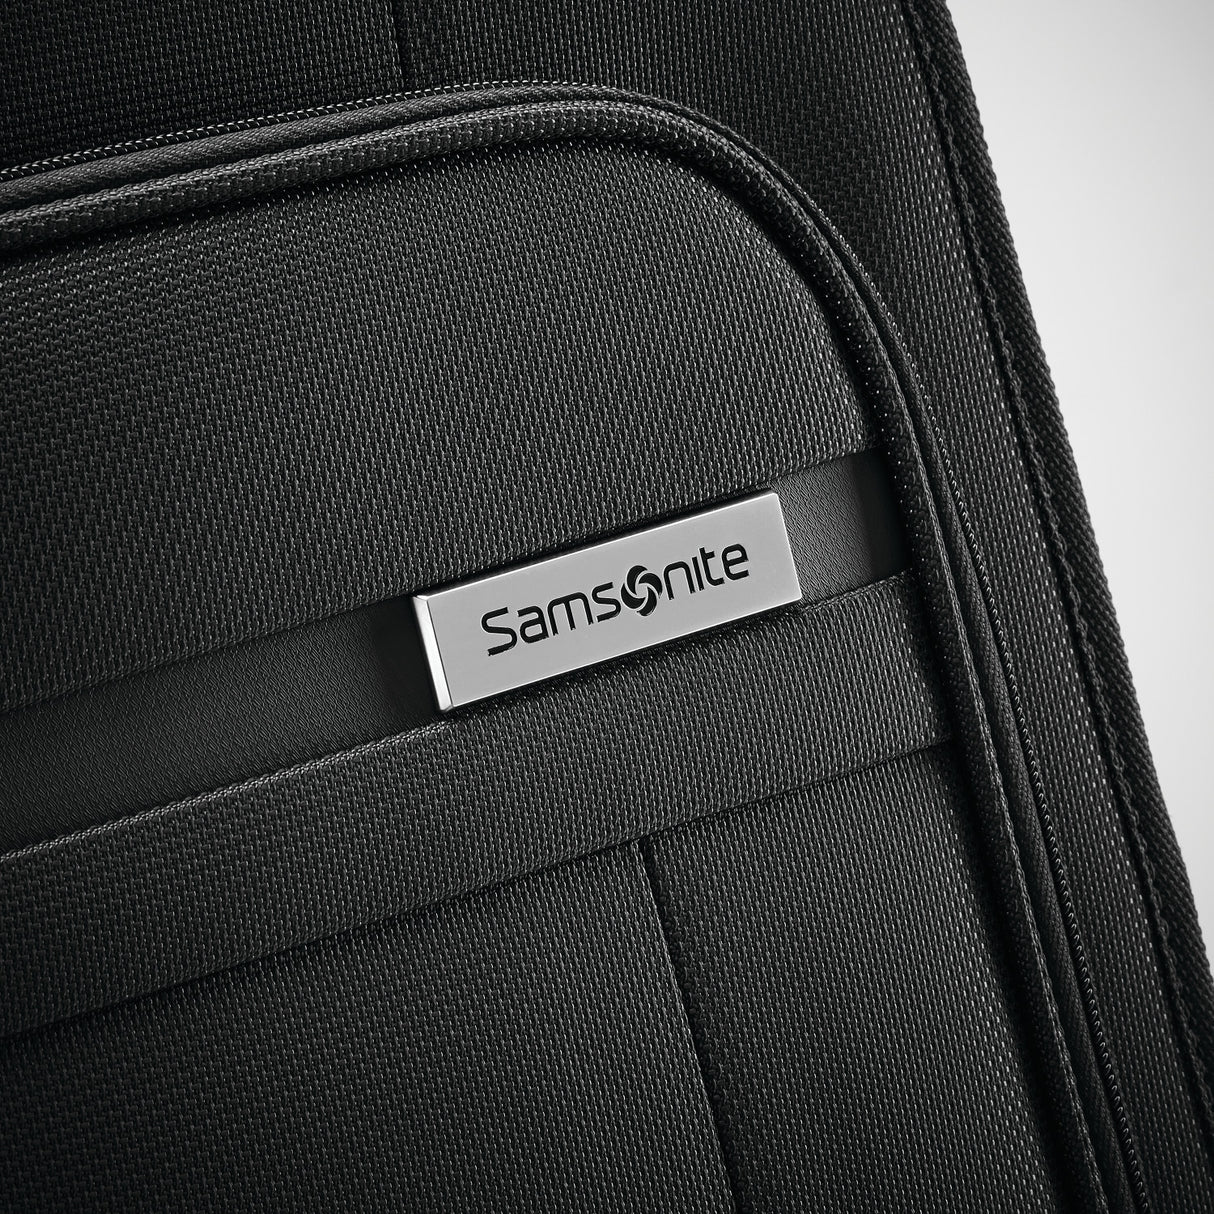 Samsonite Insignis Underseater Wheeled Carry-On , , pwo9ztn8i2qao2iqphbz_68024021-74a2-4de1-b241-17f535b5ff56